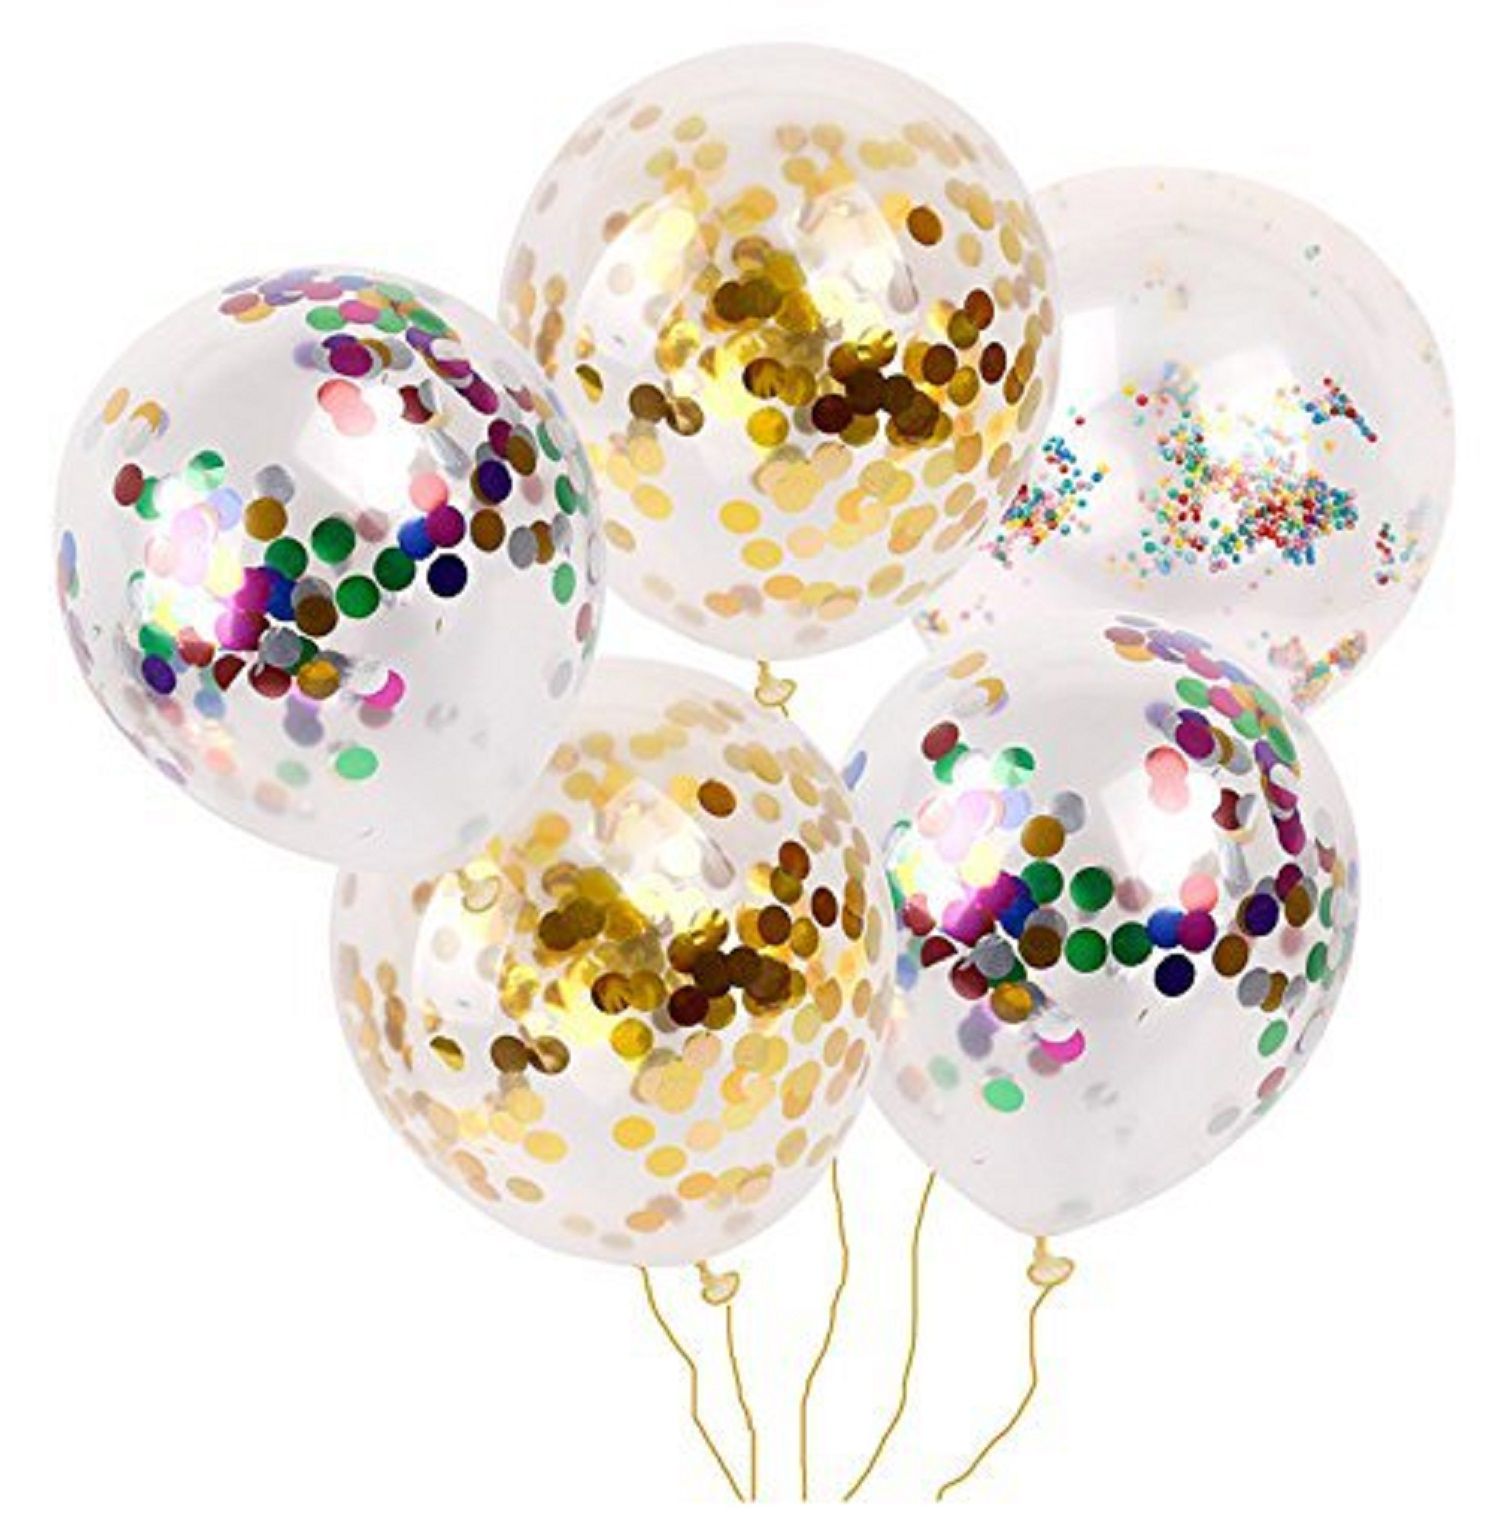     			Party Propz Birthday Confetti Balloons (Set Of 10) For Birthday, Anniversarioes, Wedding, Baby Shower Decoration